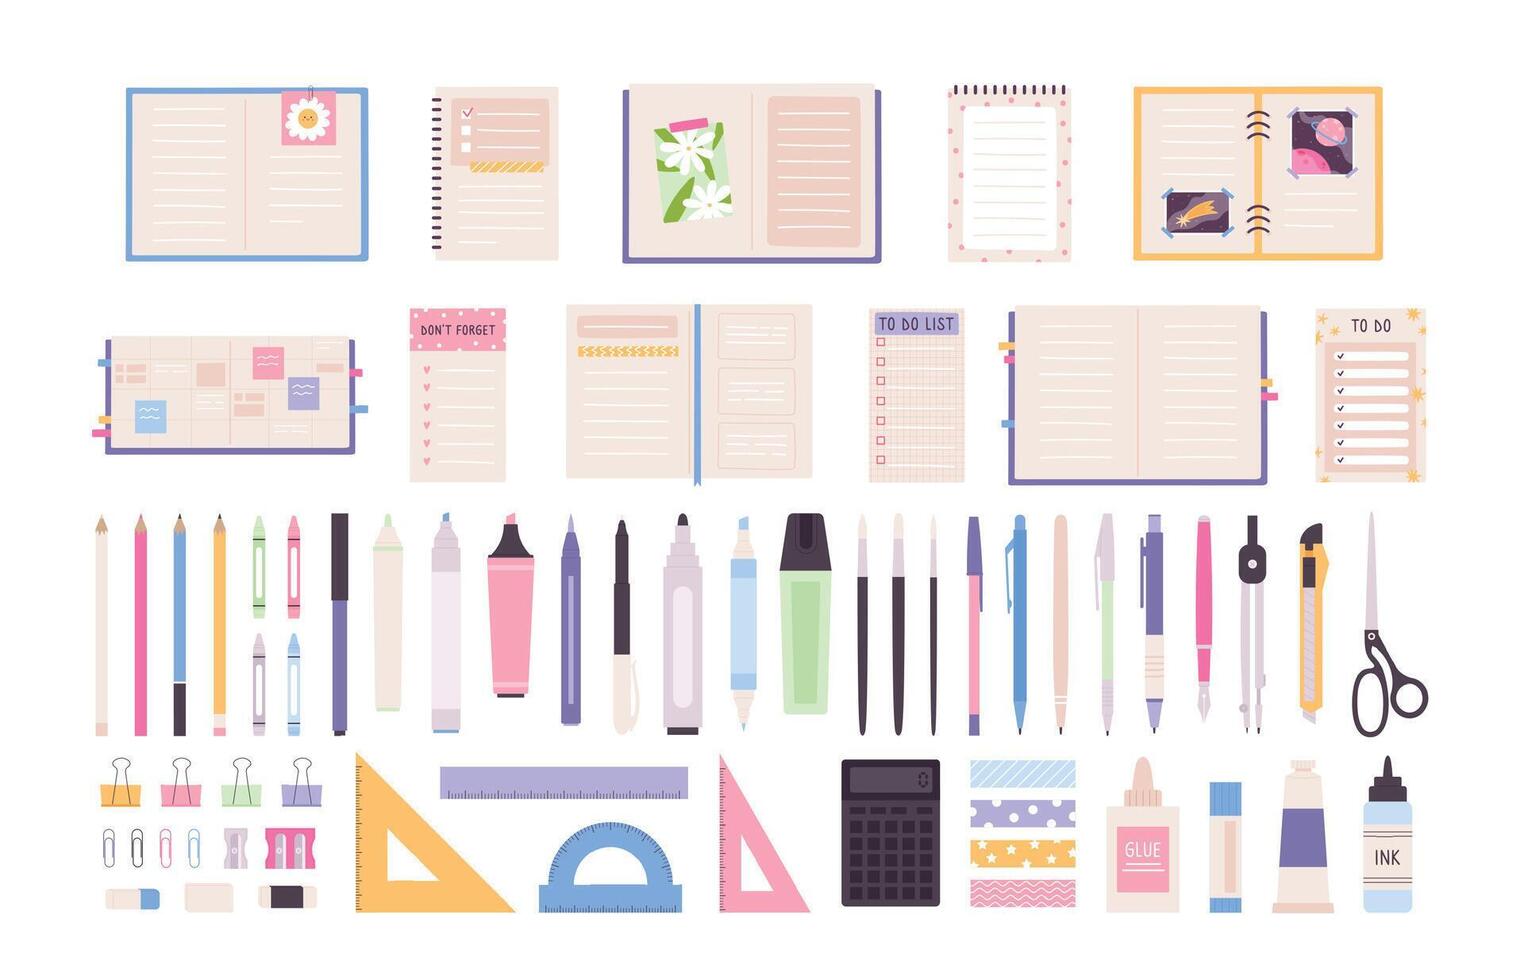 Office or school stationery items, pens, notebooks and planners. Pencil, markers, crayons and ruler. Decorative work desk objects vector set